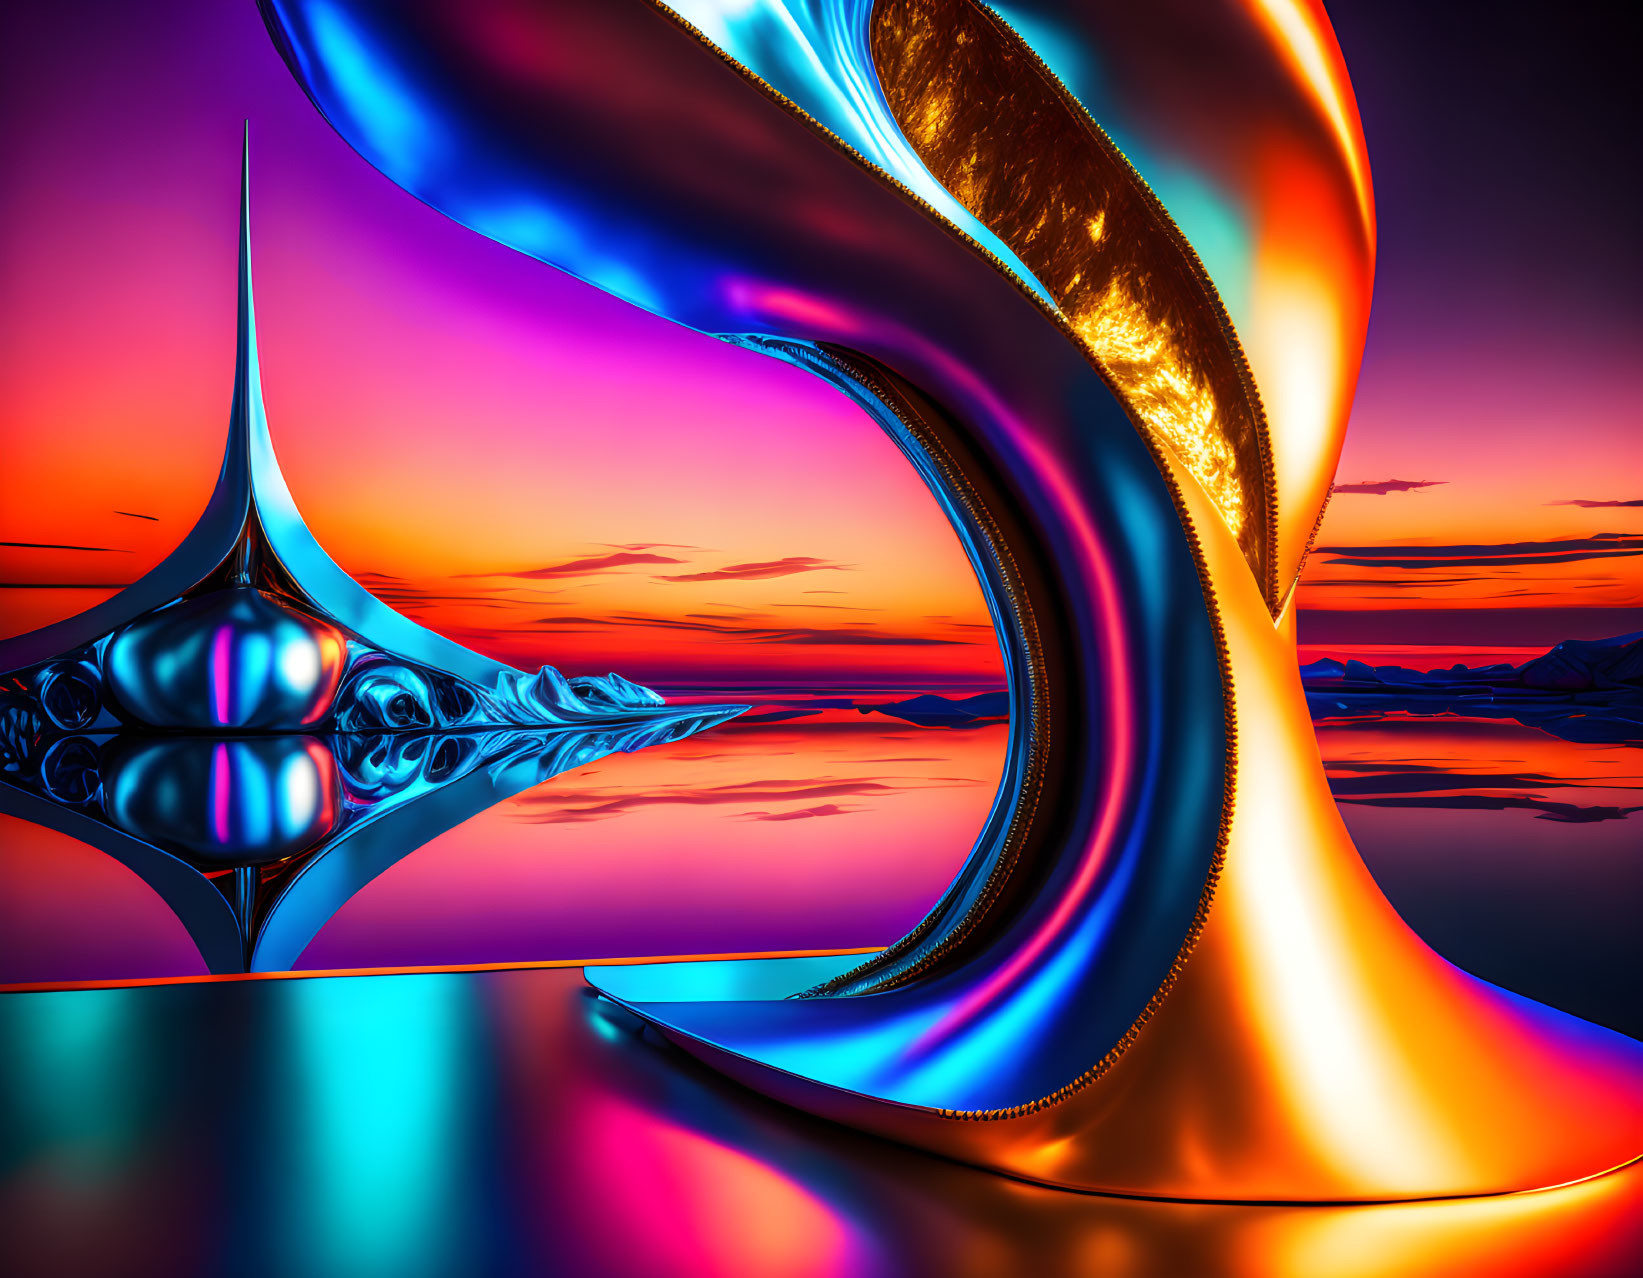 Vivid Abstract Digital Art: Reflective Surface, Metallic Curves, Spiky Structure